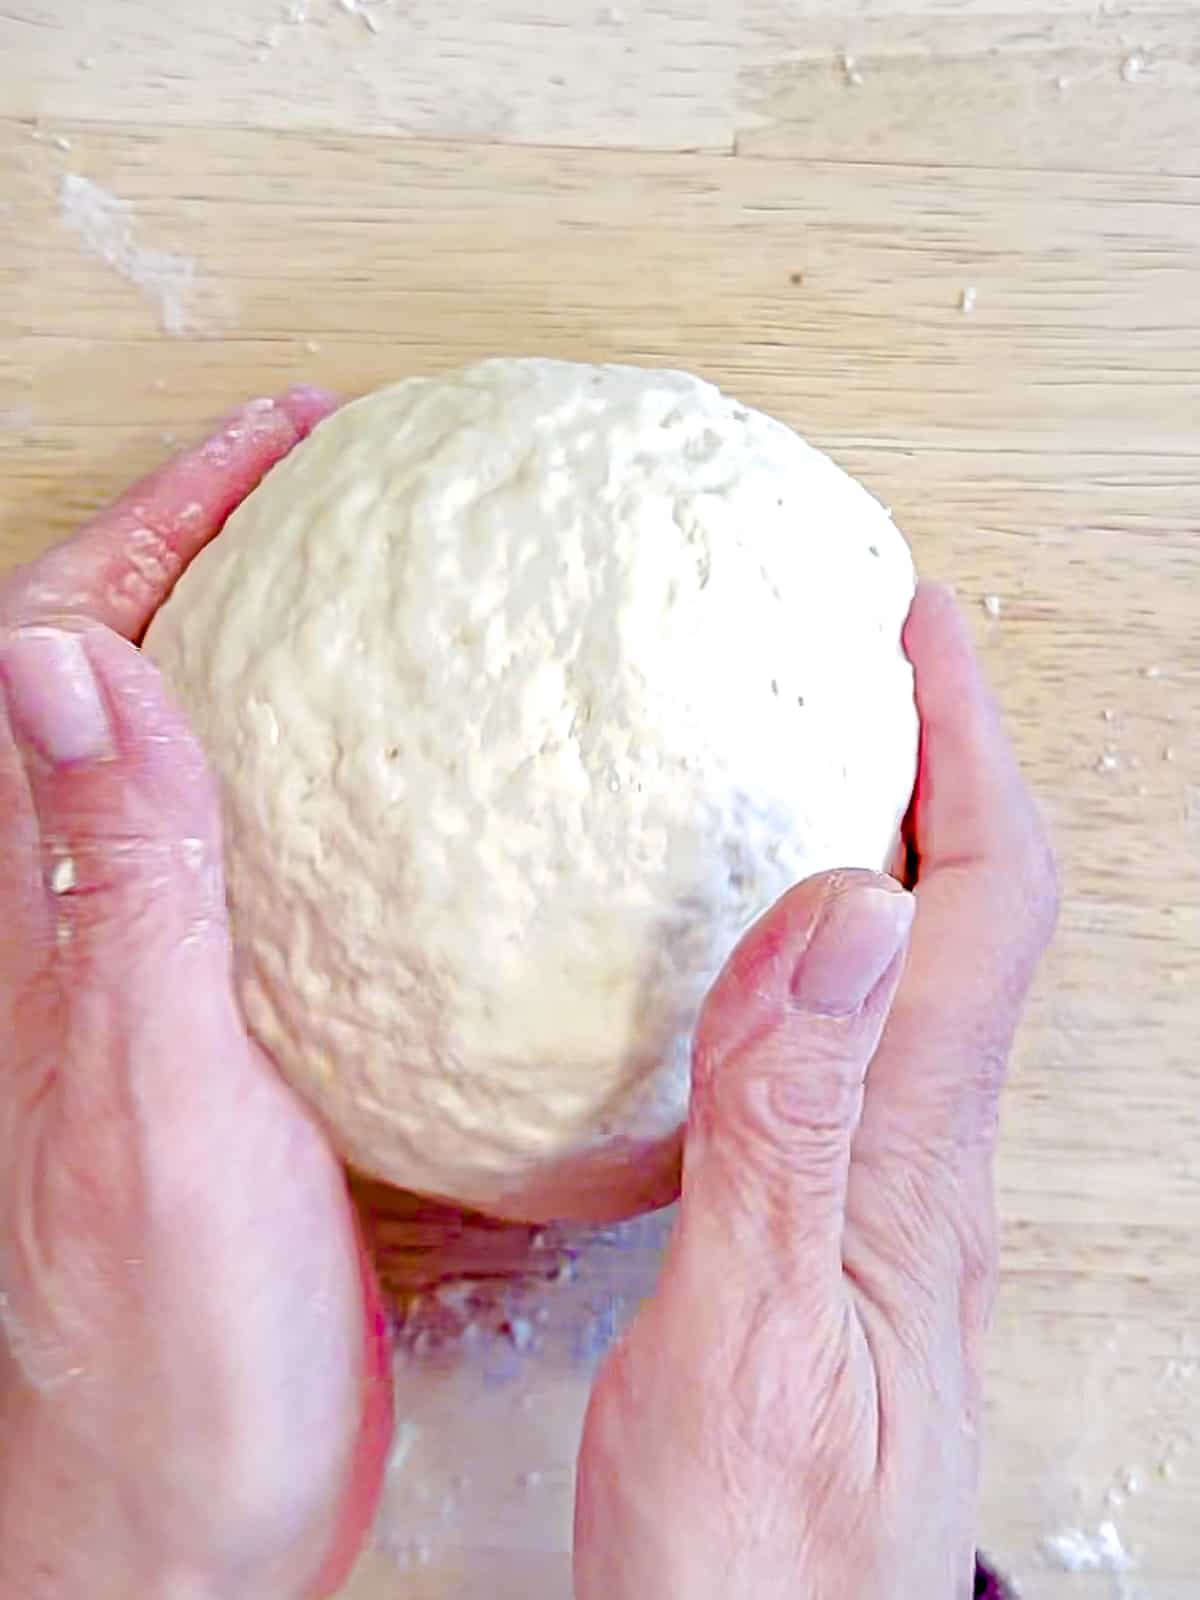 Shaping a batch of 2 Ingredient bagel dough into a large ball.